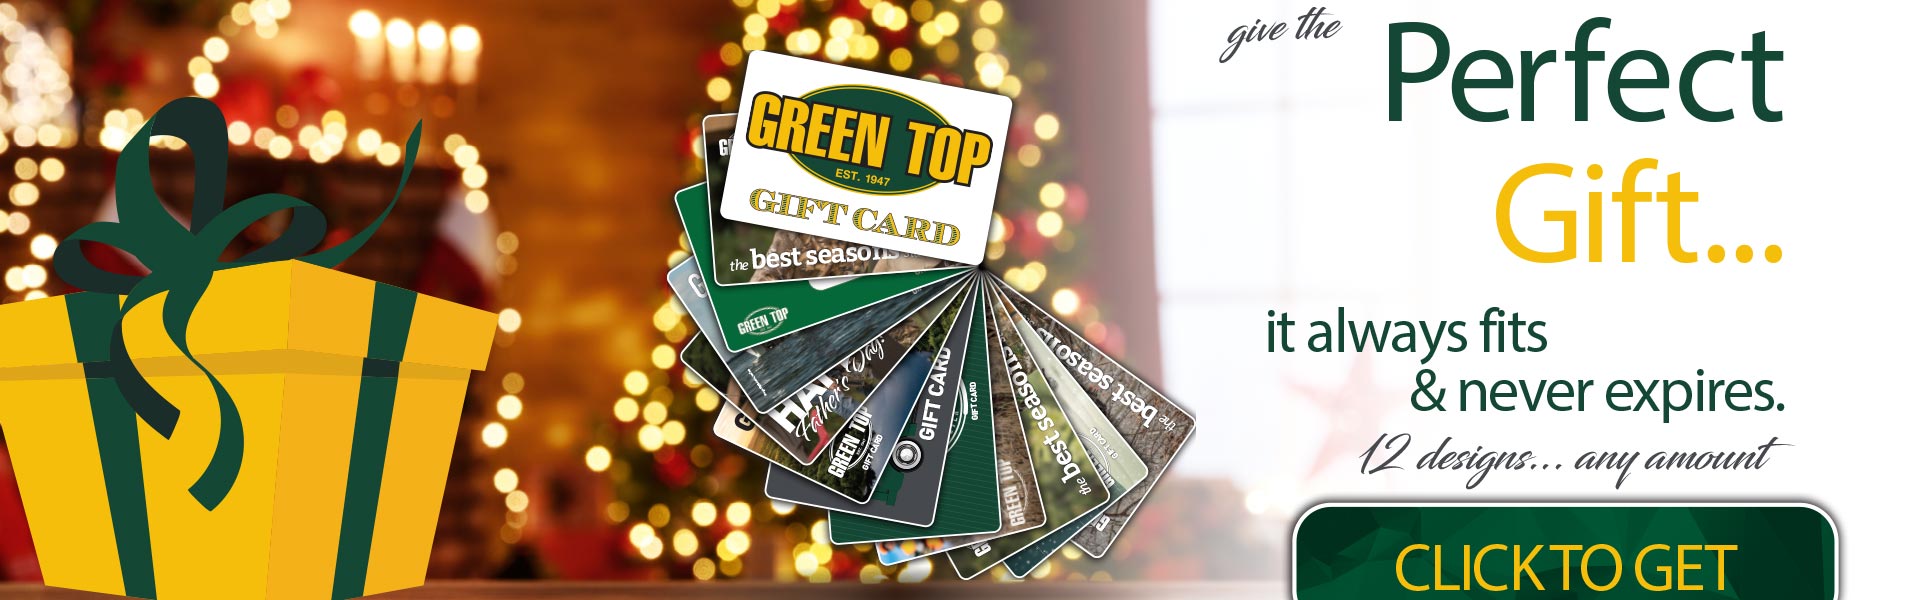 Image with gift cards and photo of Christmas tree